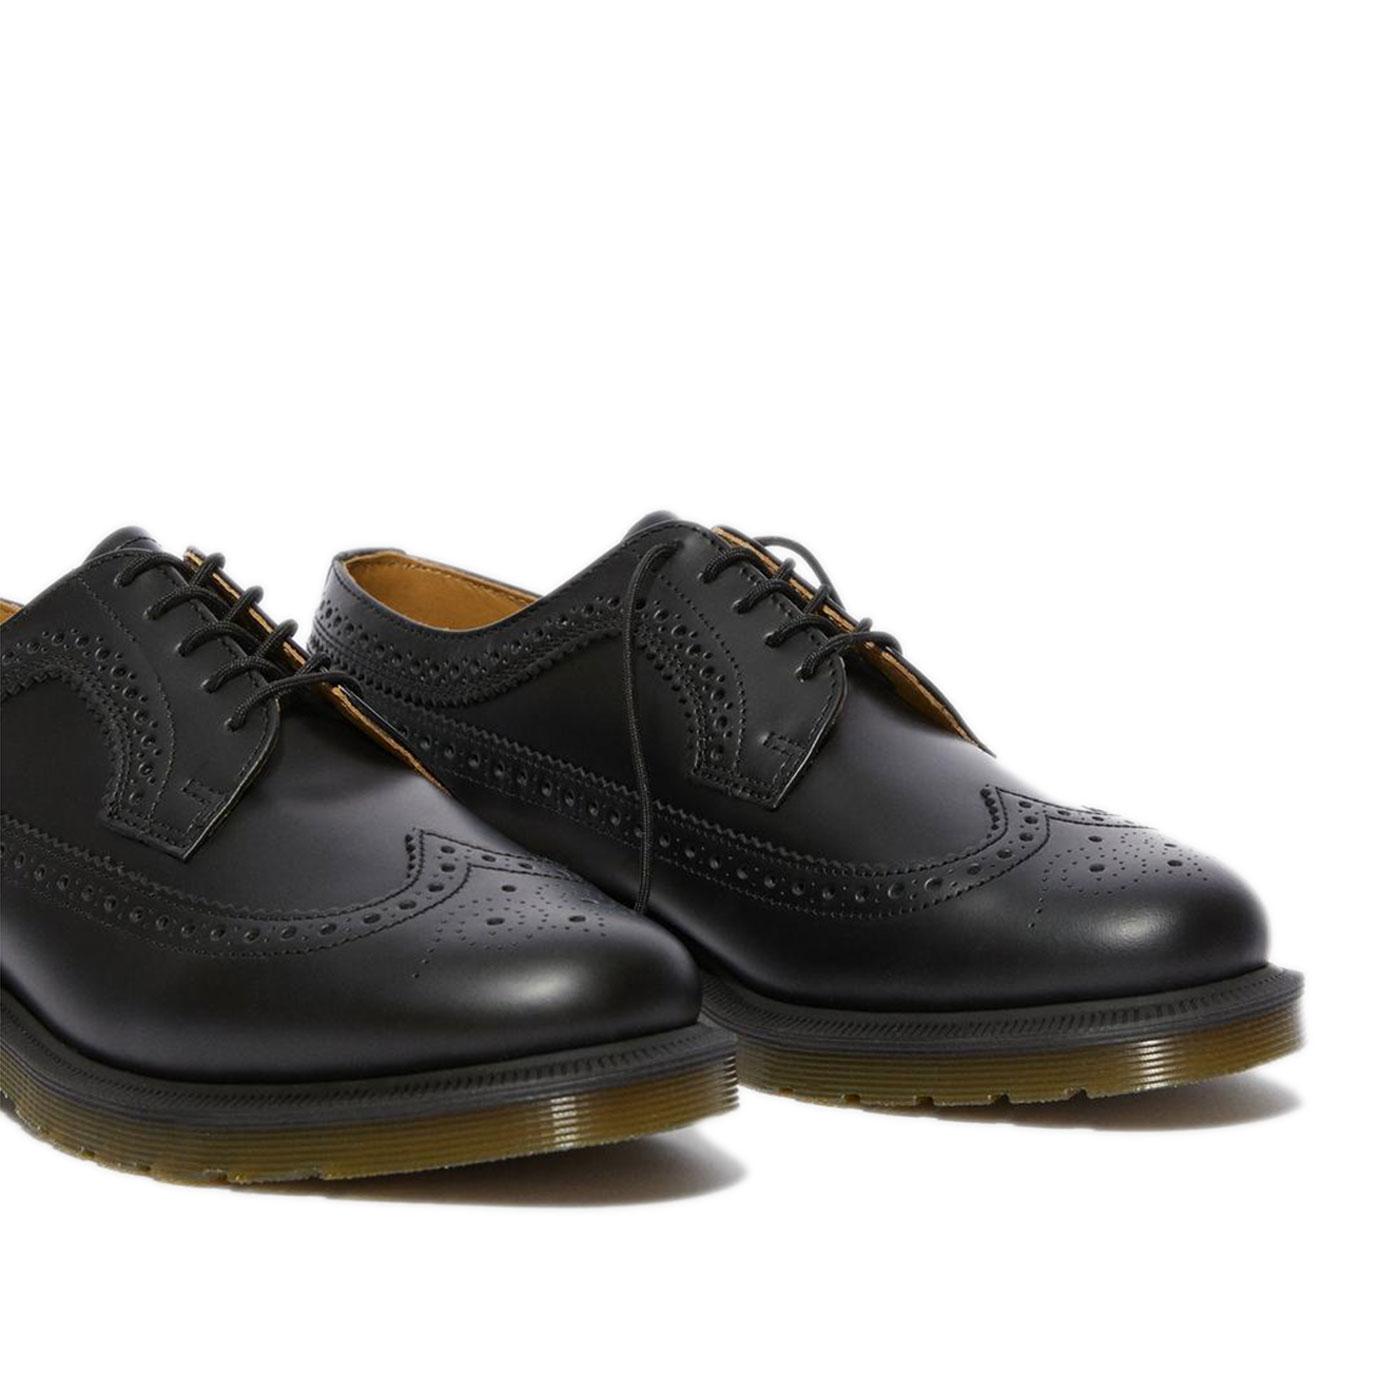 DR MARTENS 3989 Smooth Leather Brogue Shoes B